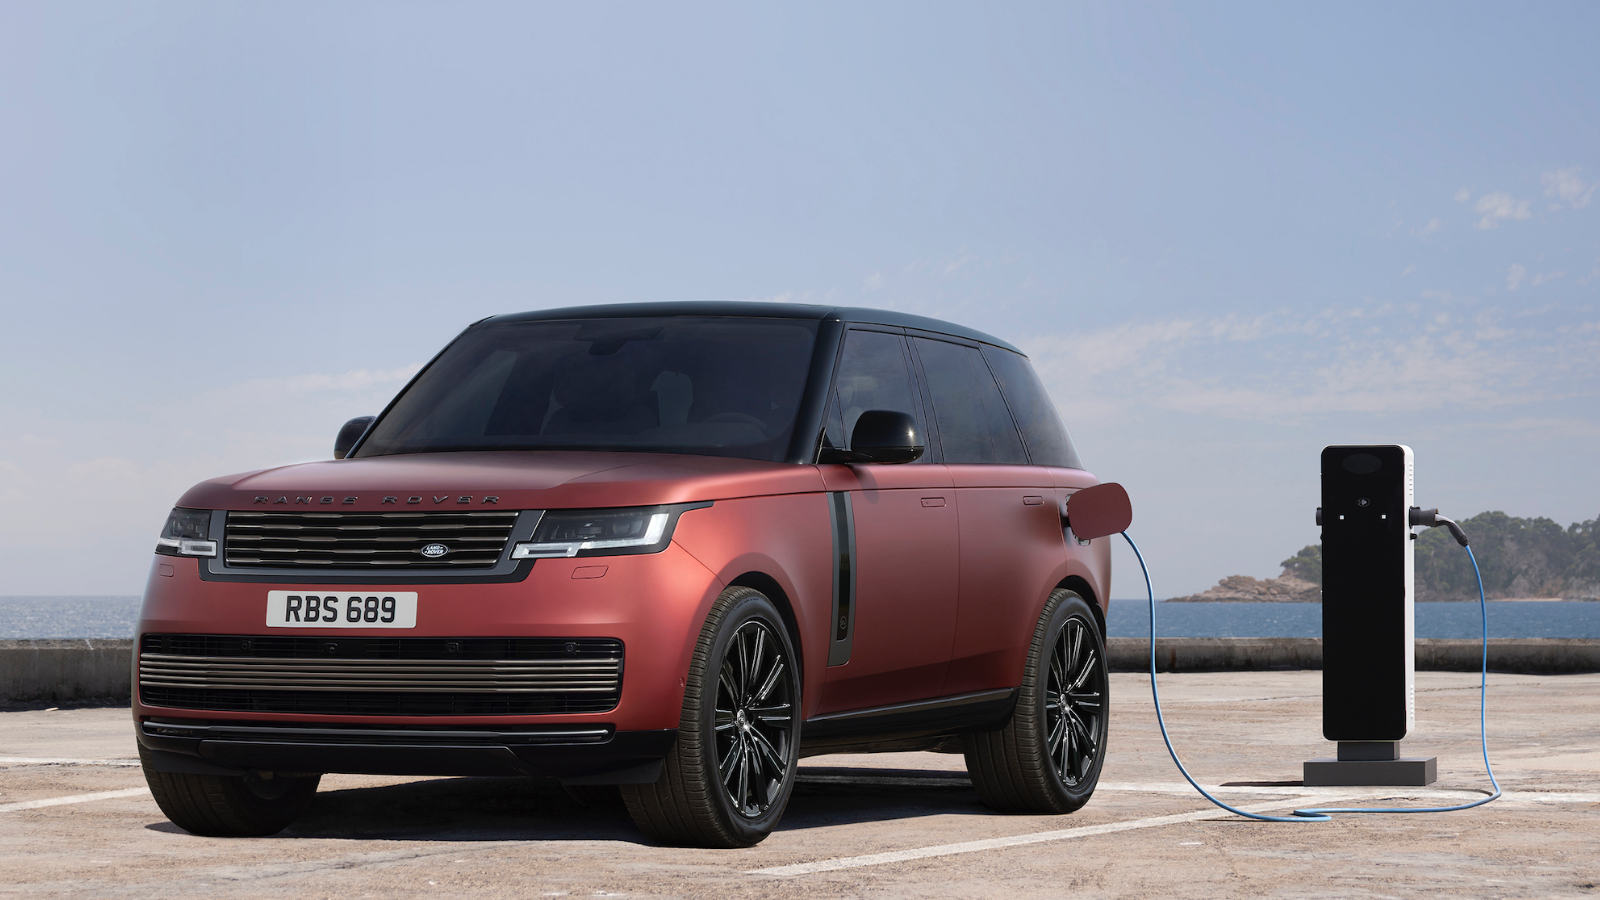 NEW RANGE ROVER: ORDERS OPEN FOR FLAGSHIP SV MODEL AND EXTENDED RANGE PLUG-IN HYBRID WITH UP TO 70 MILES OF EV RANGE